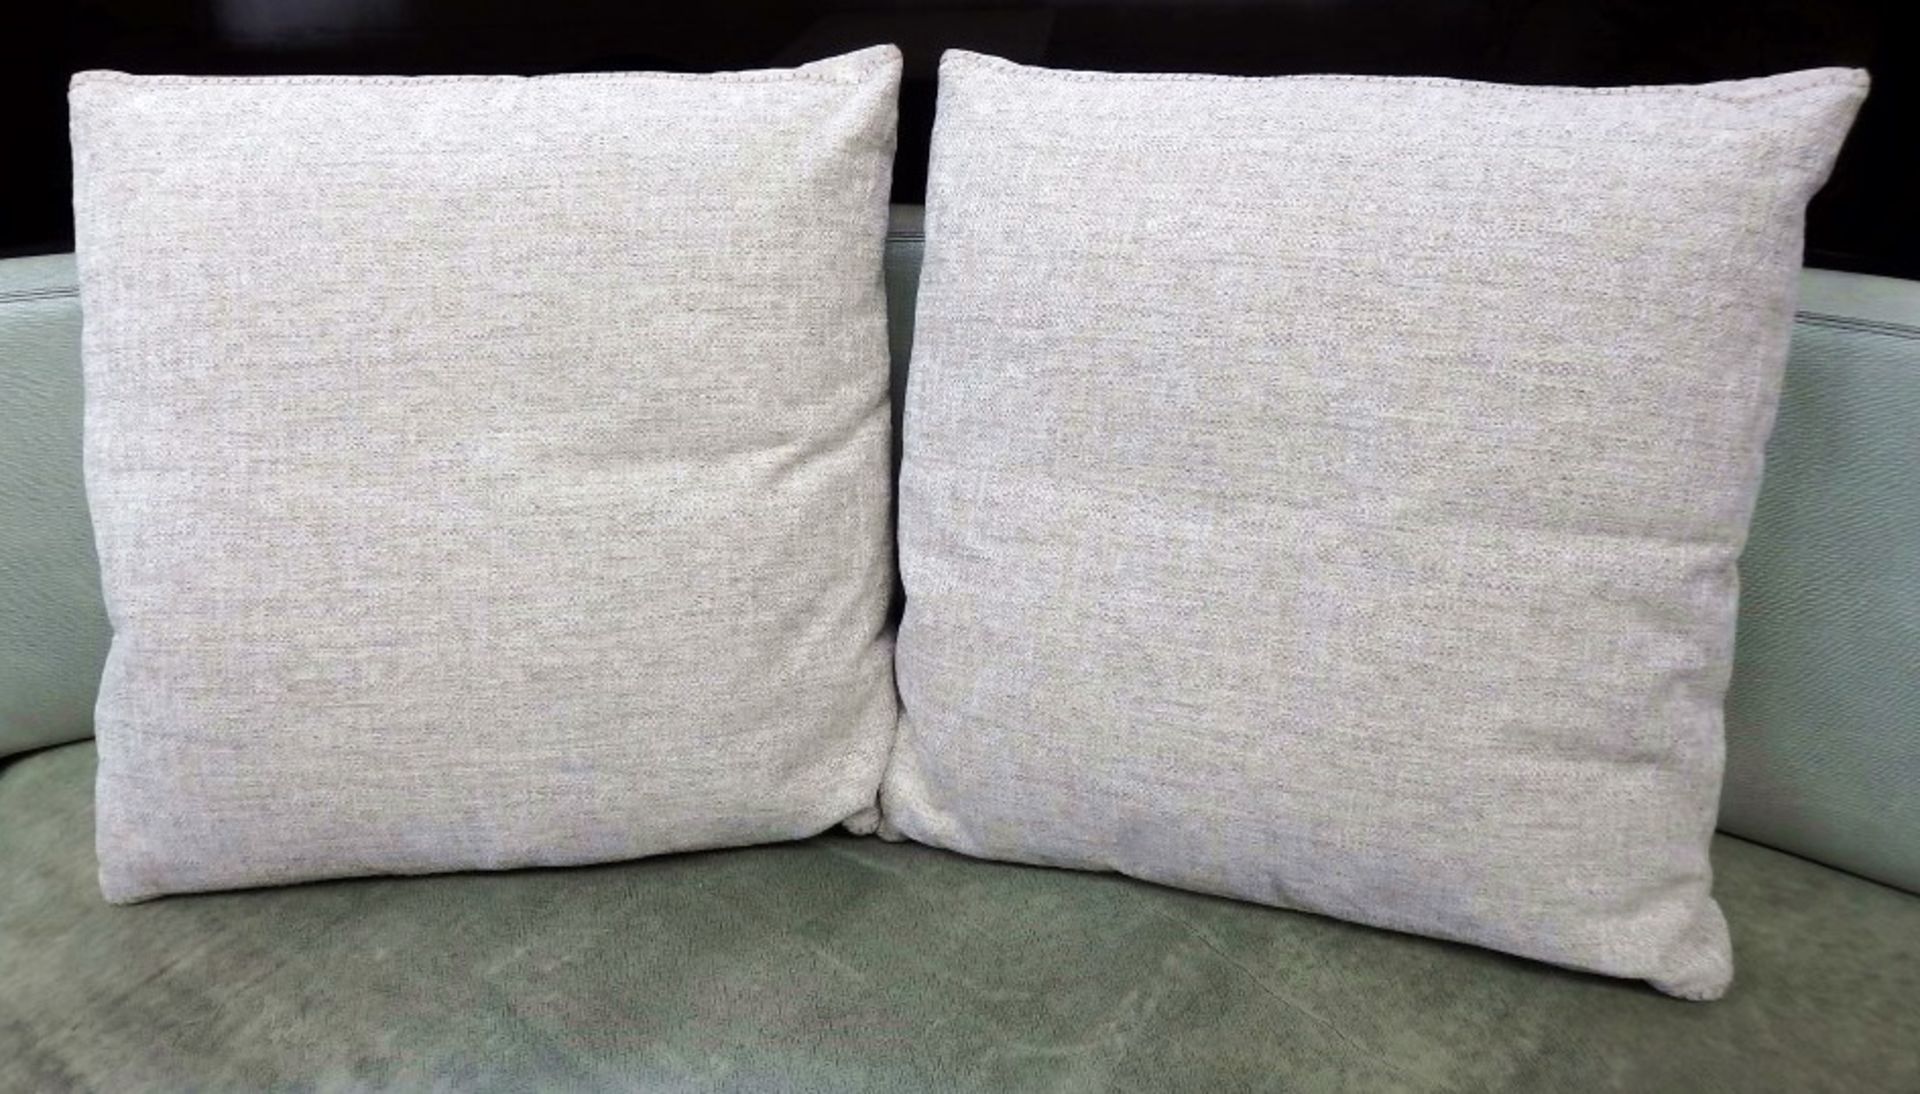 A Matching Pair Large Of Designer B&B Italia "RAY" Cushions - Ref: 4647387 A - Excellent - Image 2 of 4